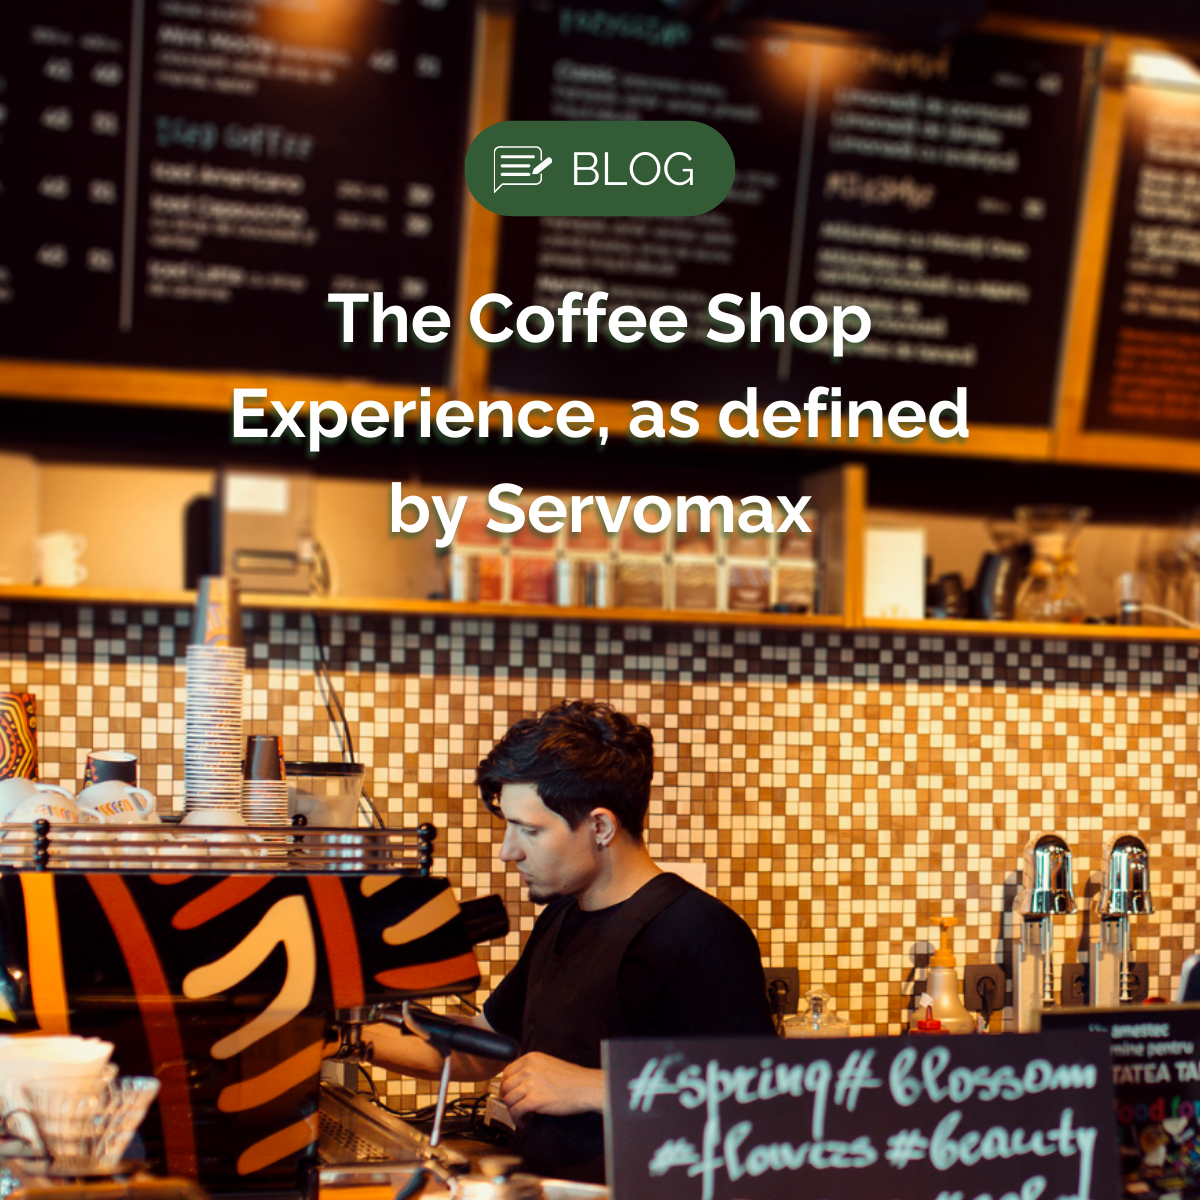 The Coffee Shop Experience as defined by Servomax